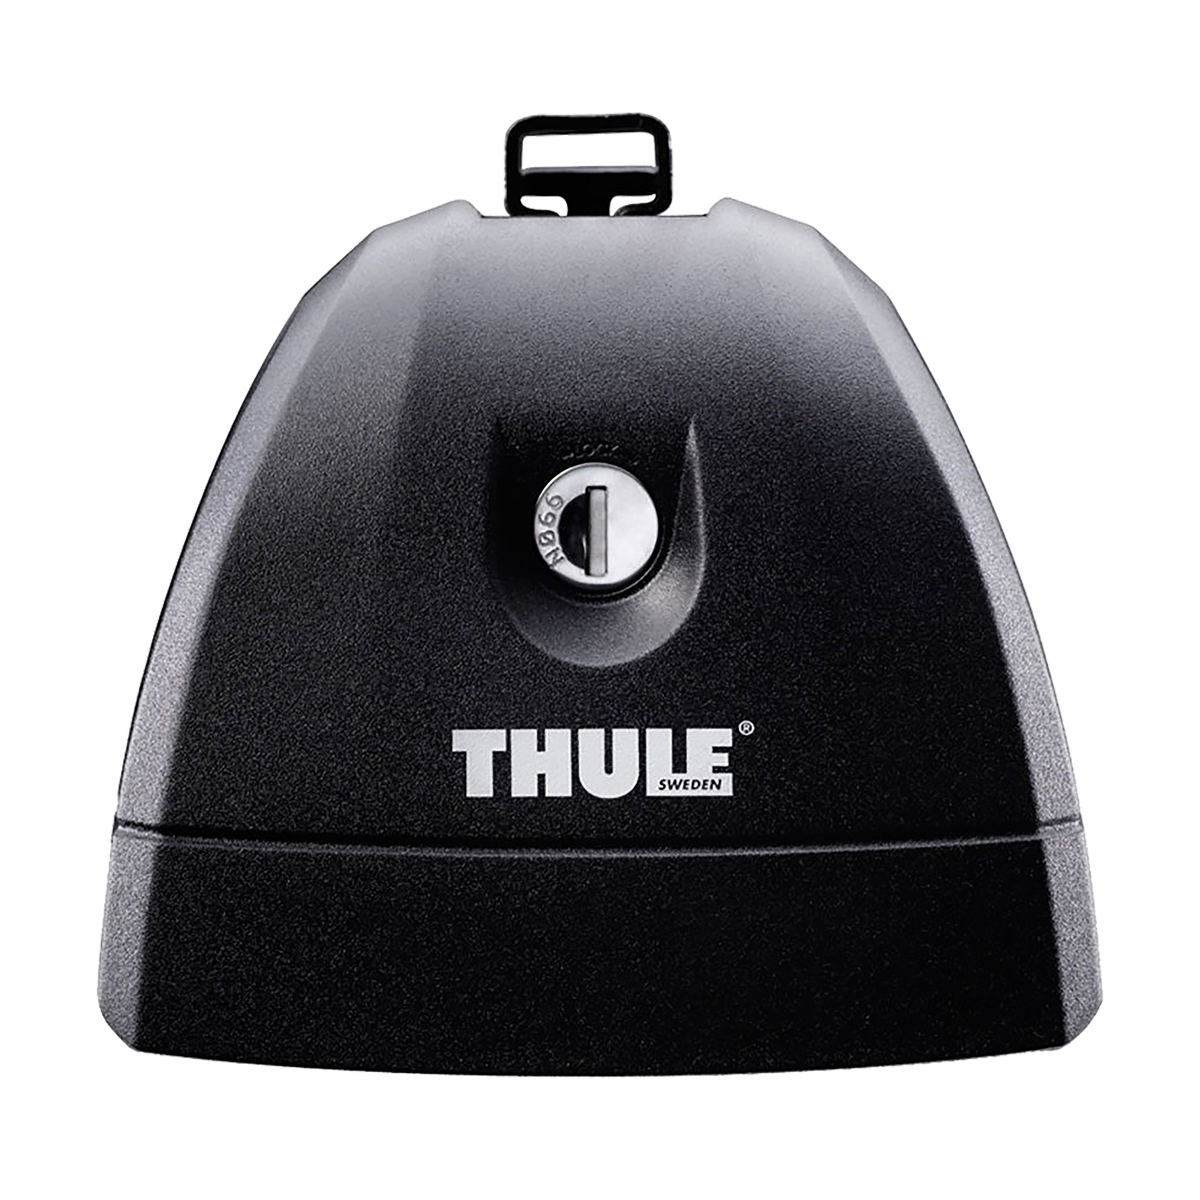 Thule Rapid System 751, 7511 foot for vehicles